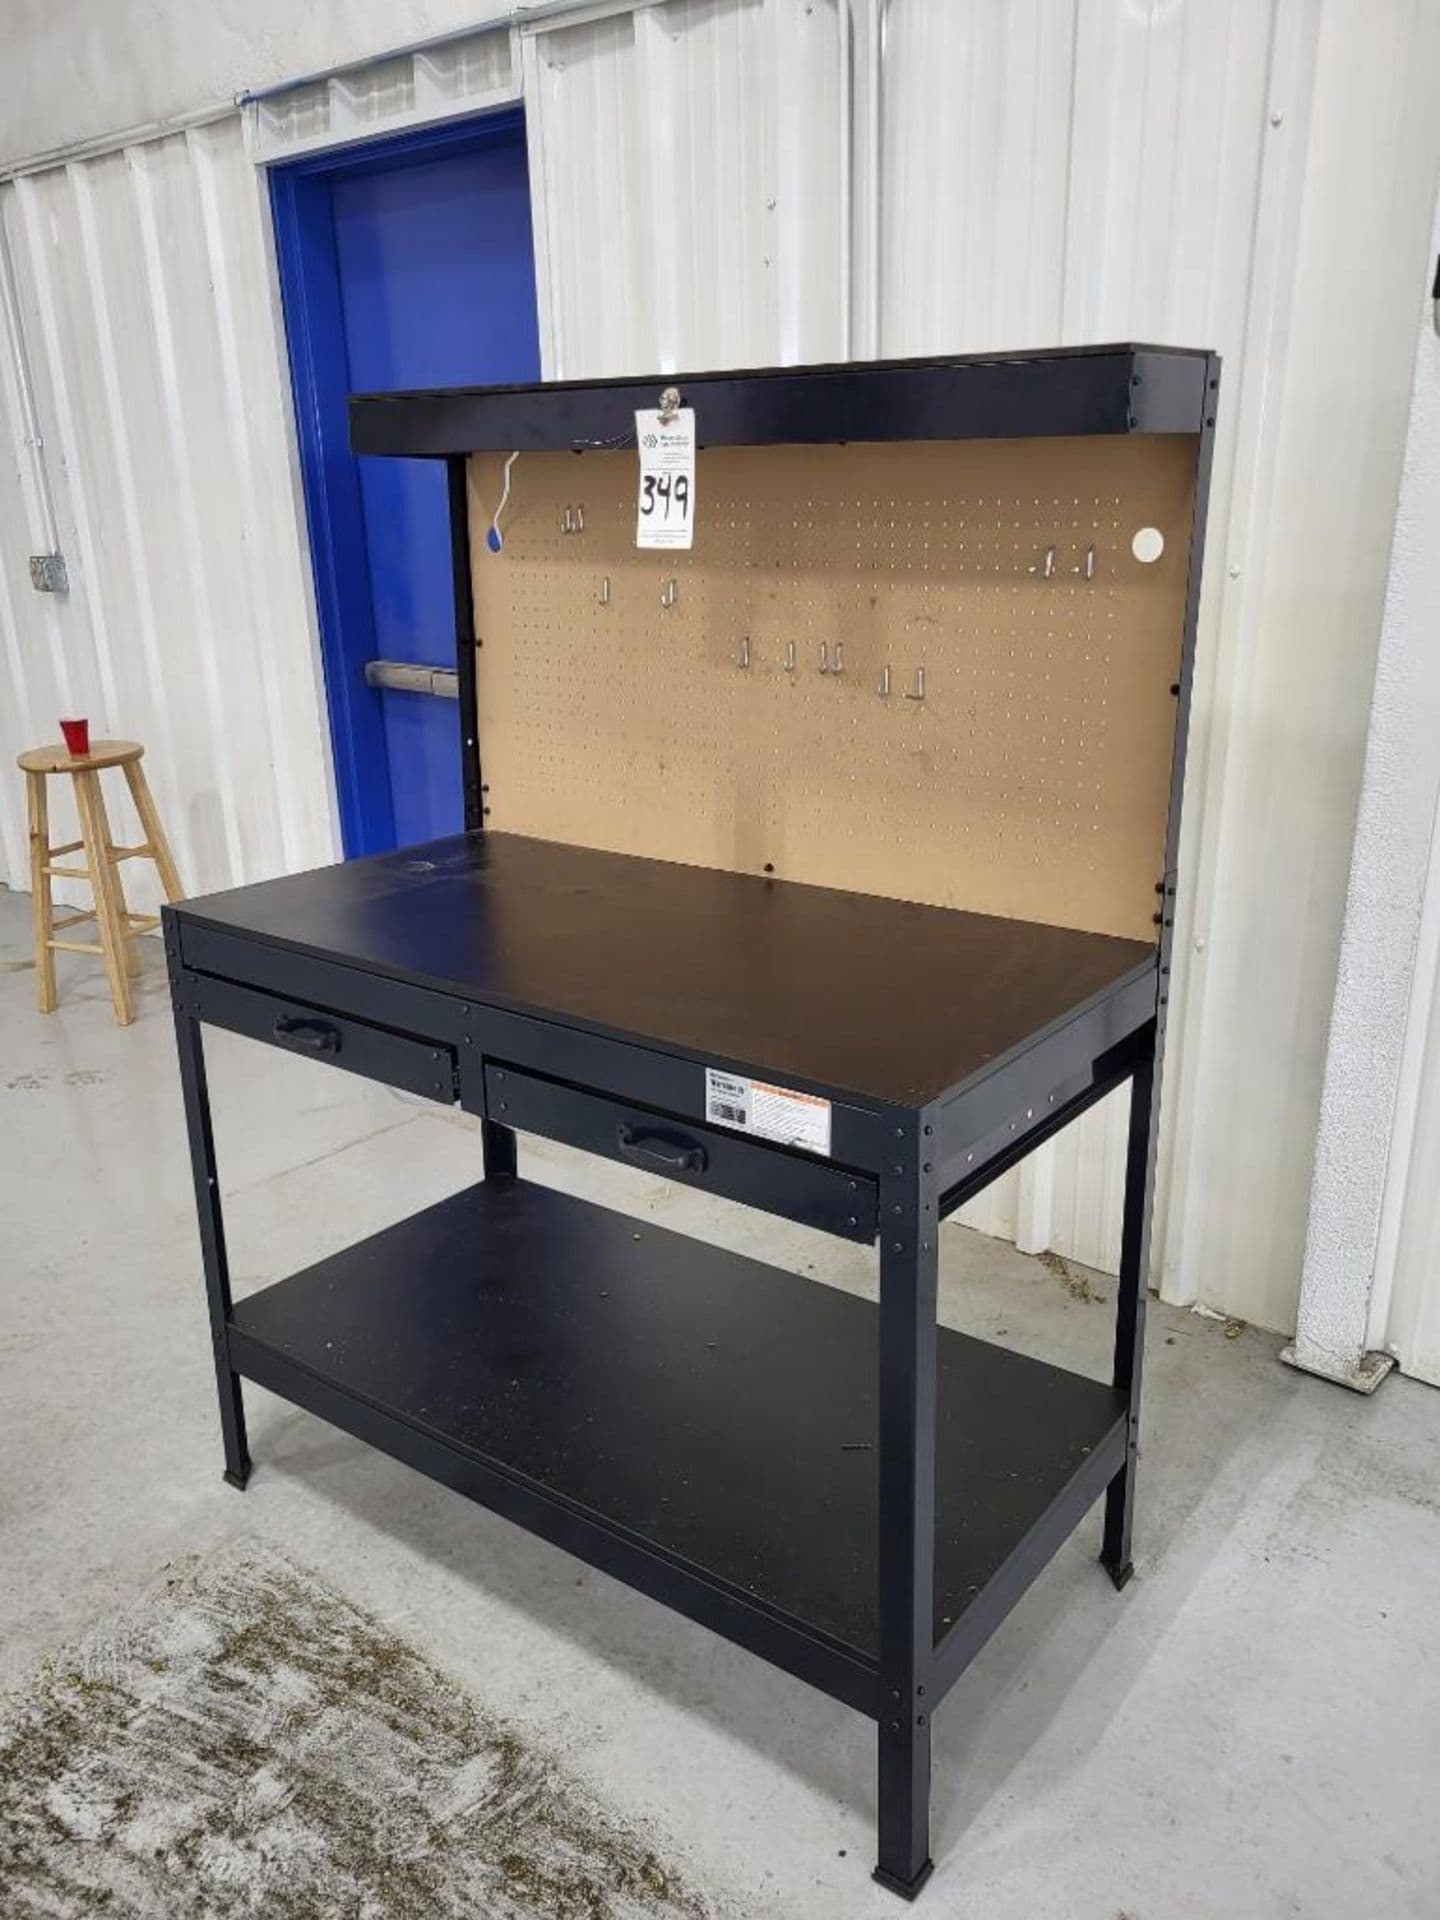 multi-purpose work bench with lighting and outlet